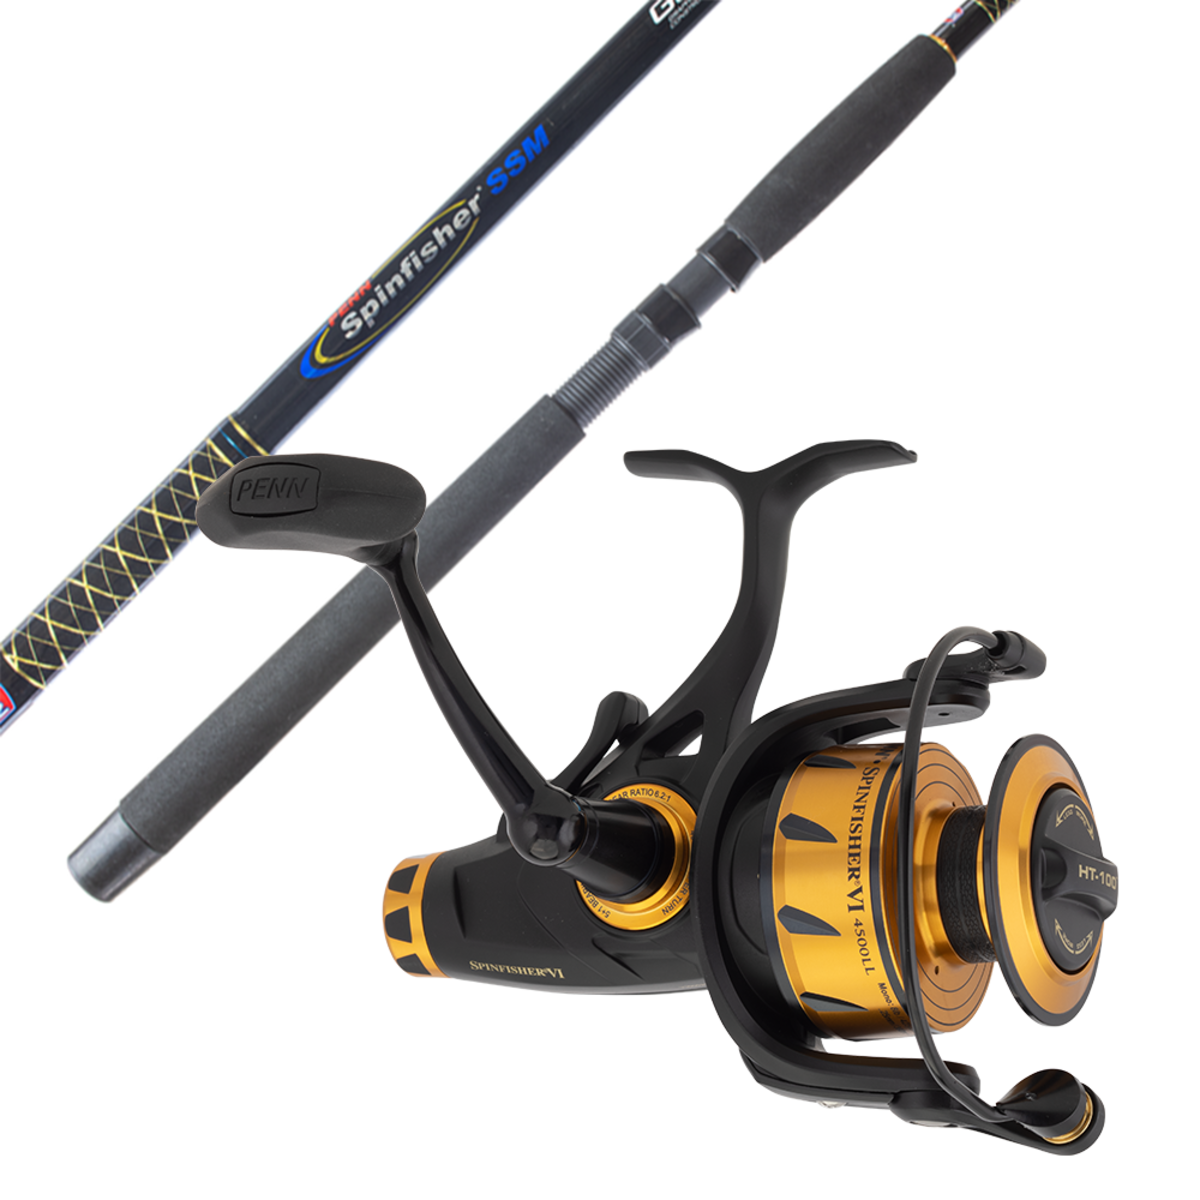 Ssvi Spinfisher Vi 4500Ll / Spinfisher 7'0 5-8Kg Spin Combo